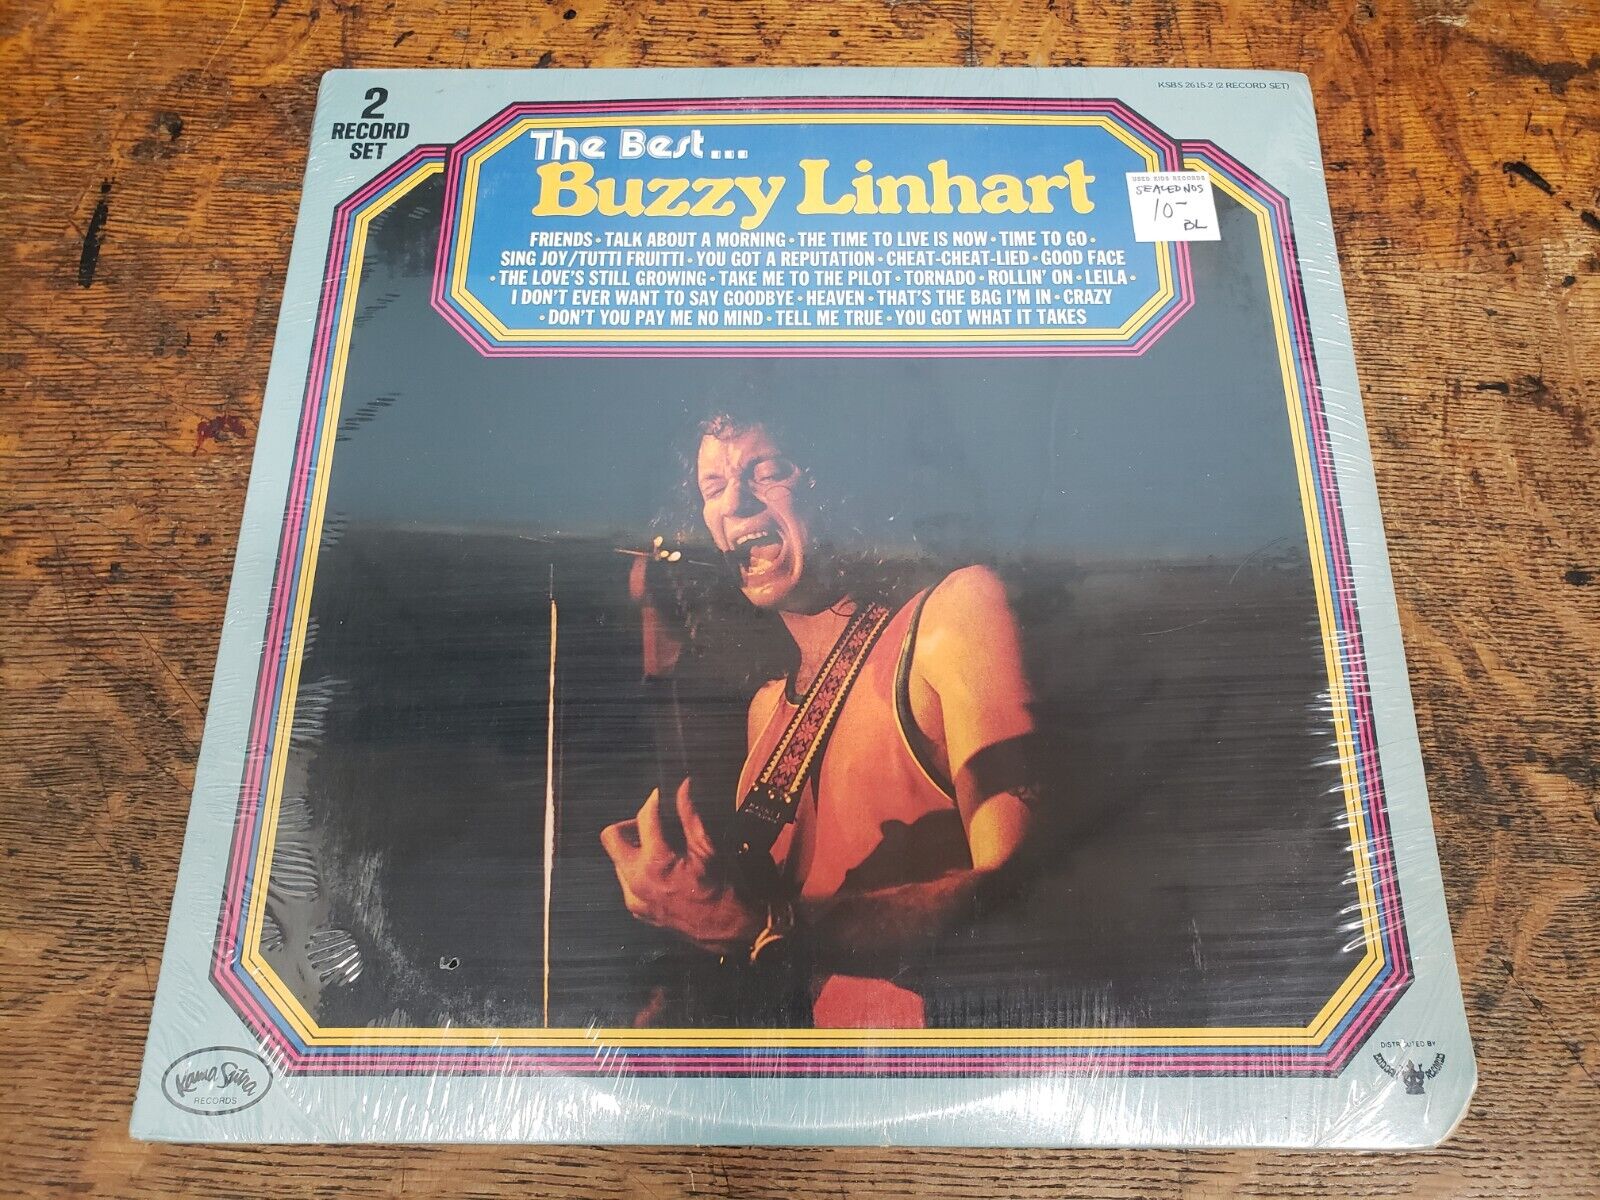 BUZZY LINHART The Best KAMA SUTRA 1976 Rock LP VINYL Record SEALED NEW OLD STOCK